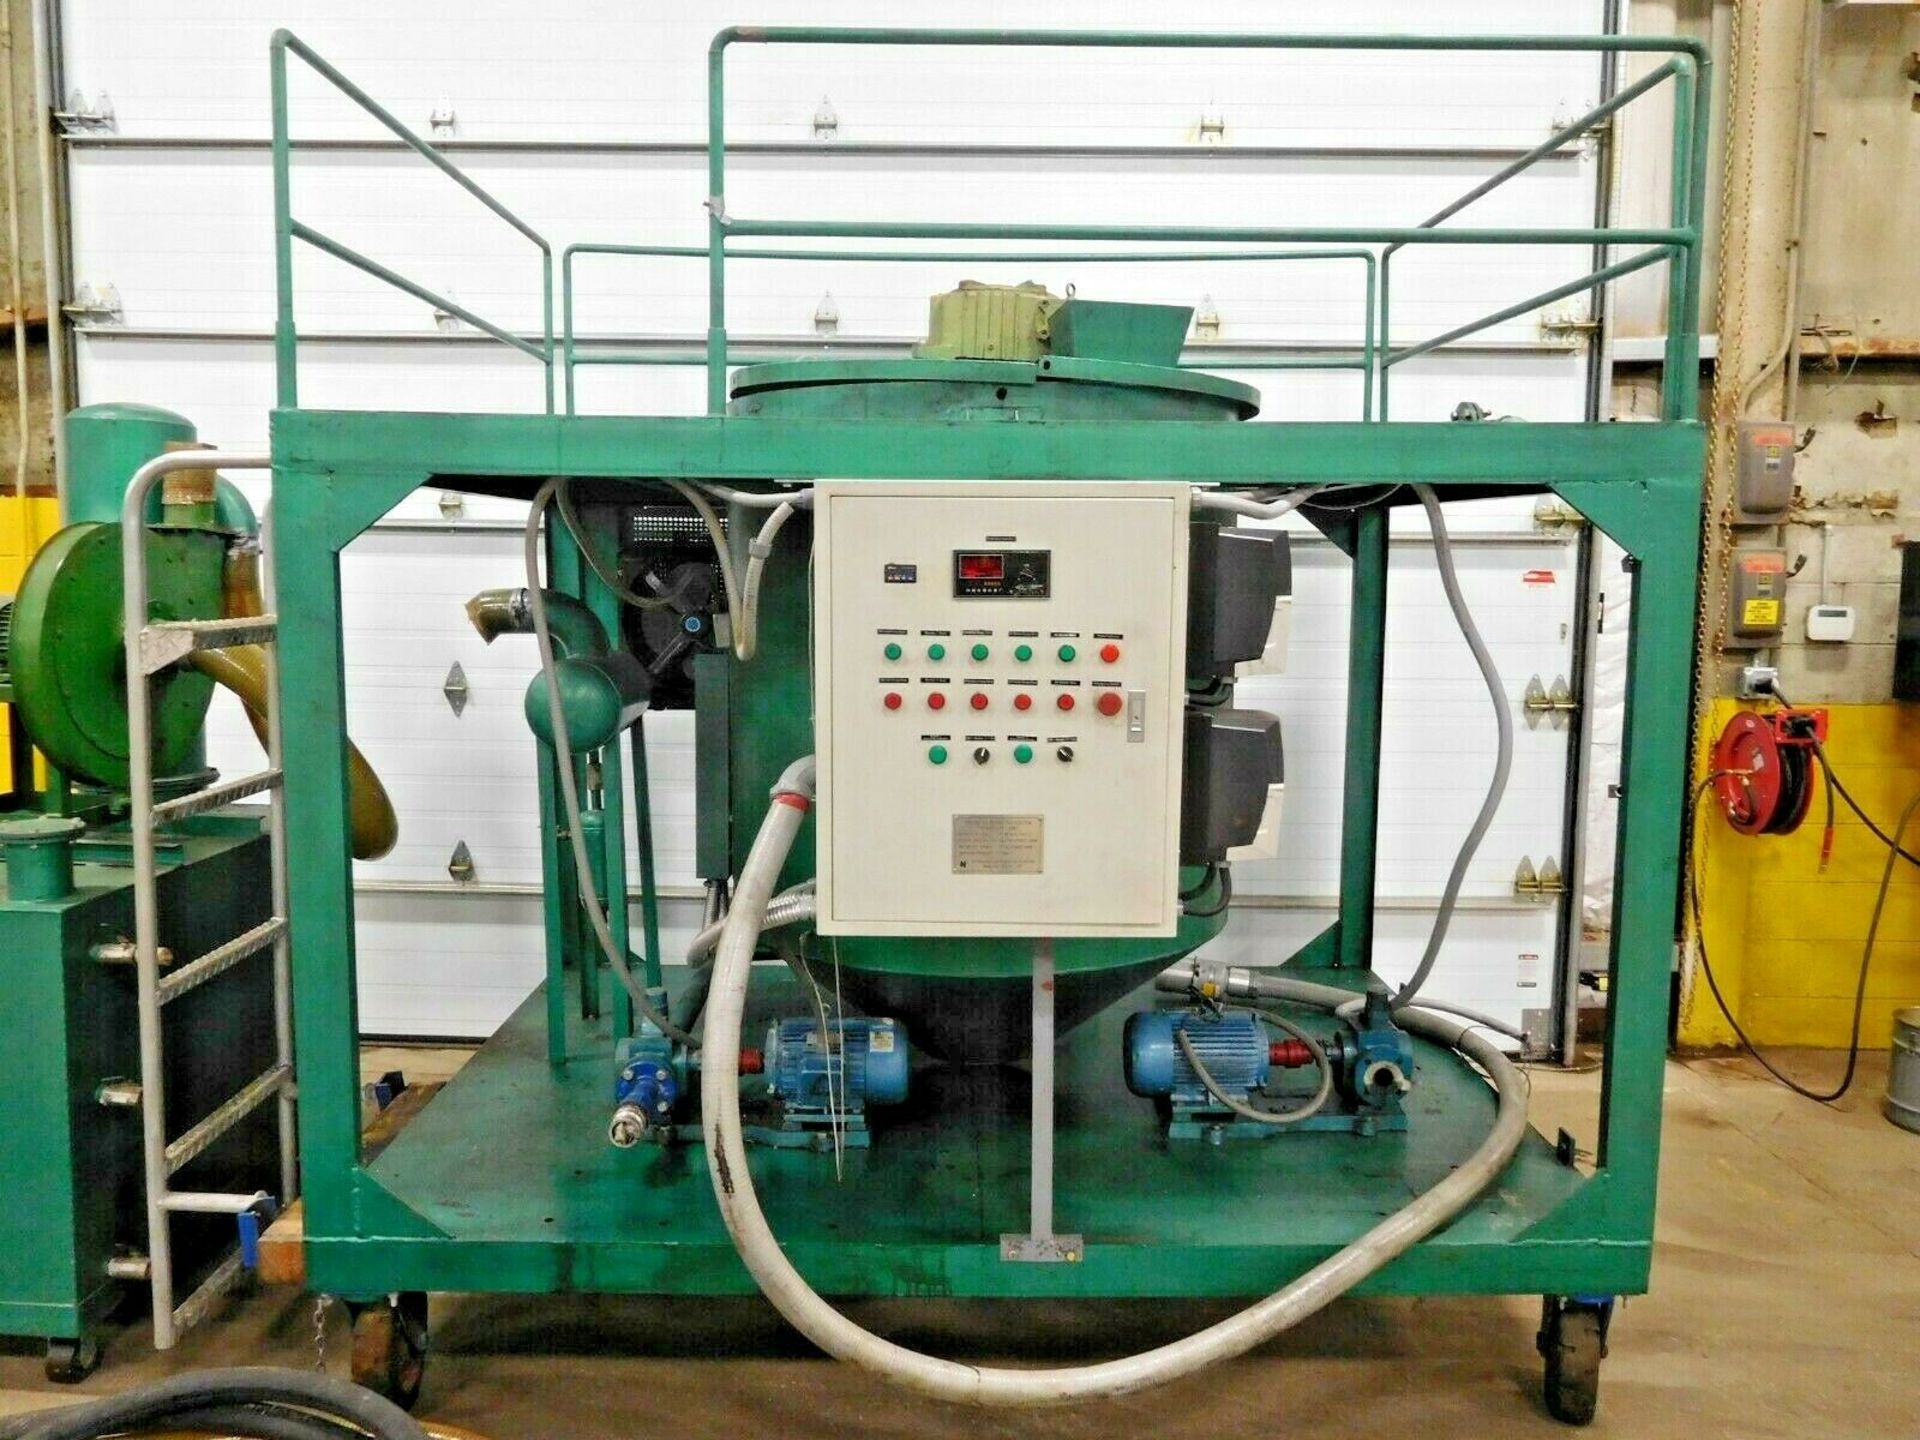 ENGINE OIL RECYCLING SYSTEM LYE-1000. 58 KW. 1000 L/D FLOW. 220 V. 3PH. - Image 2 of 4